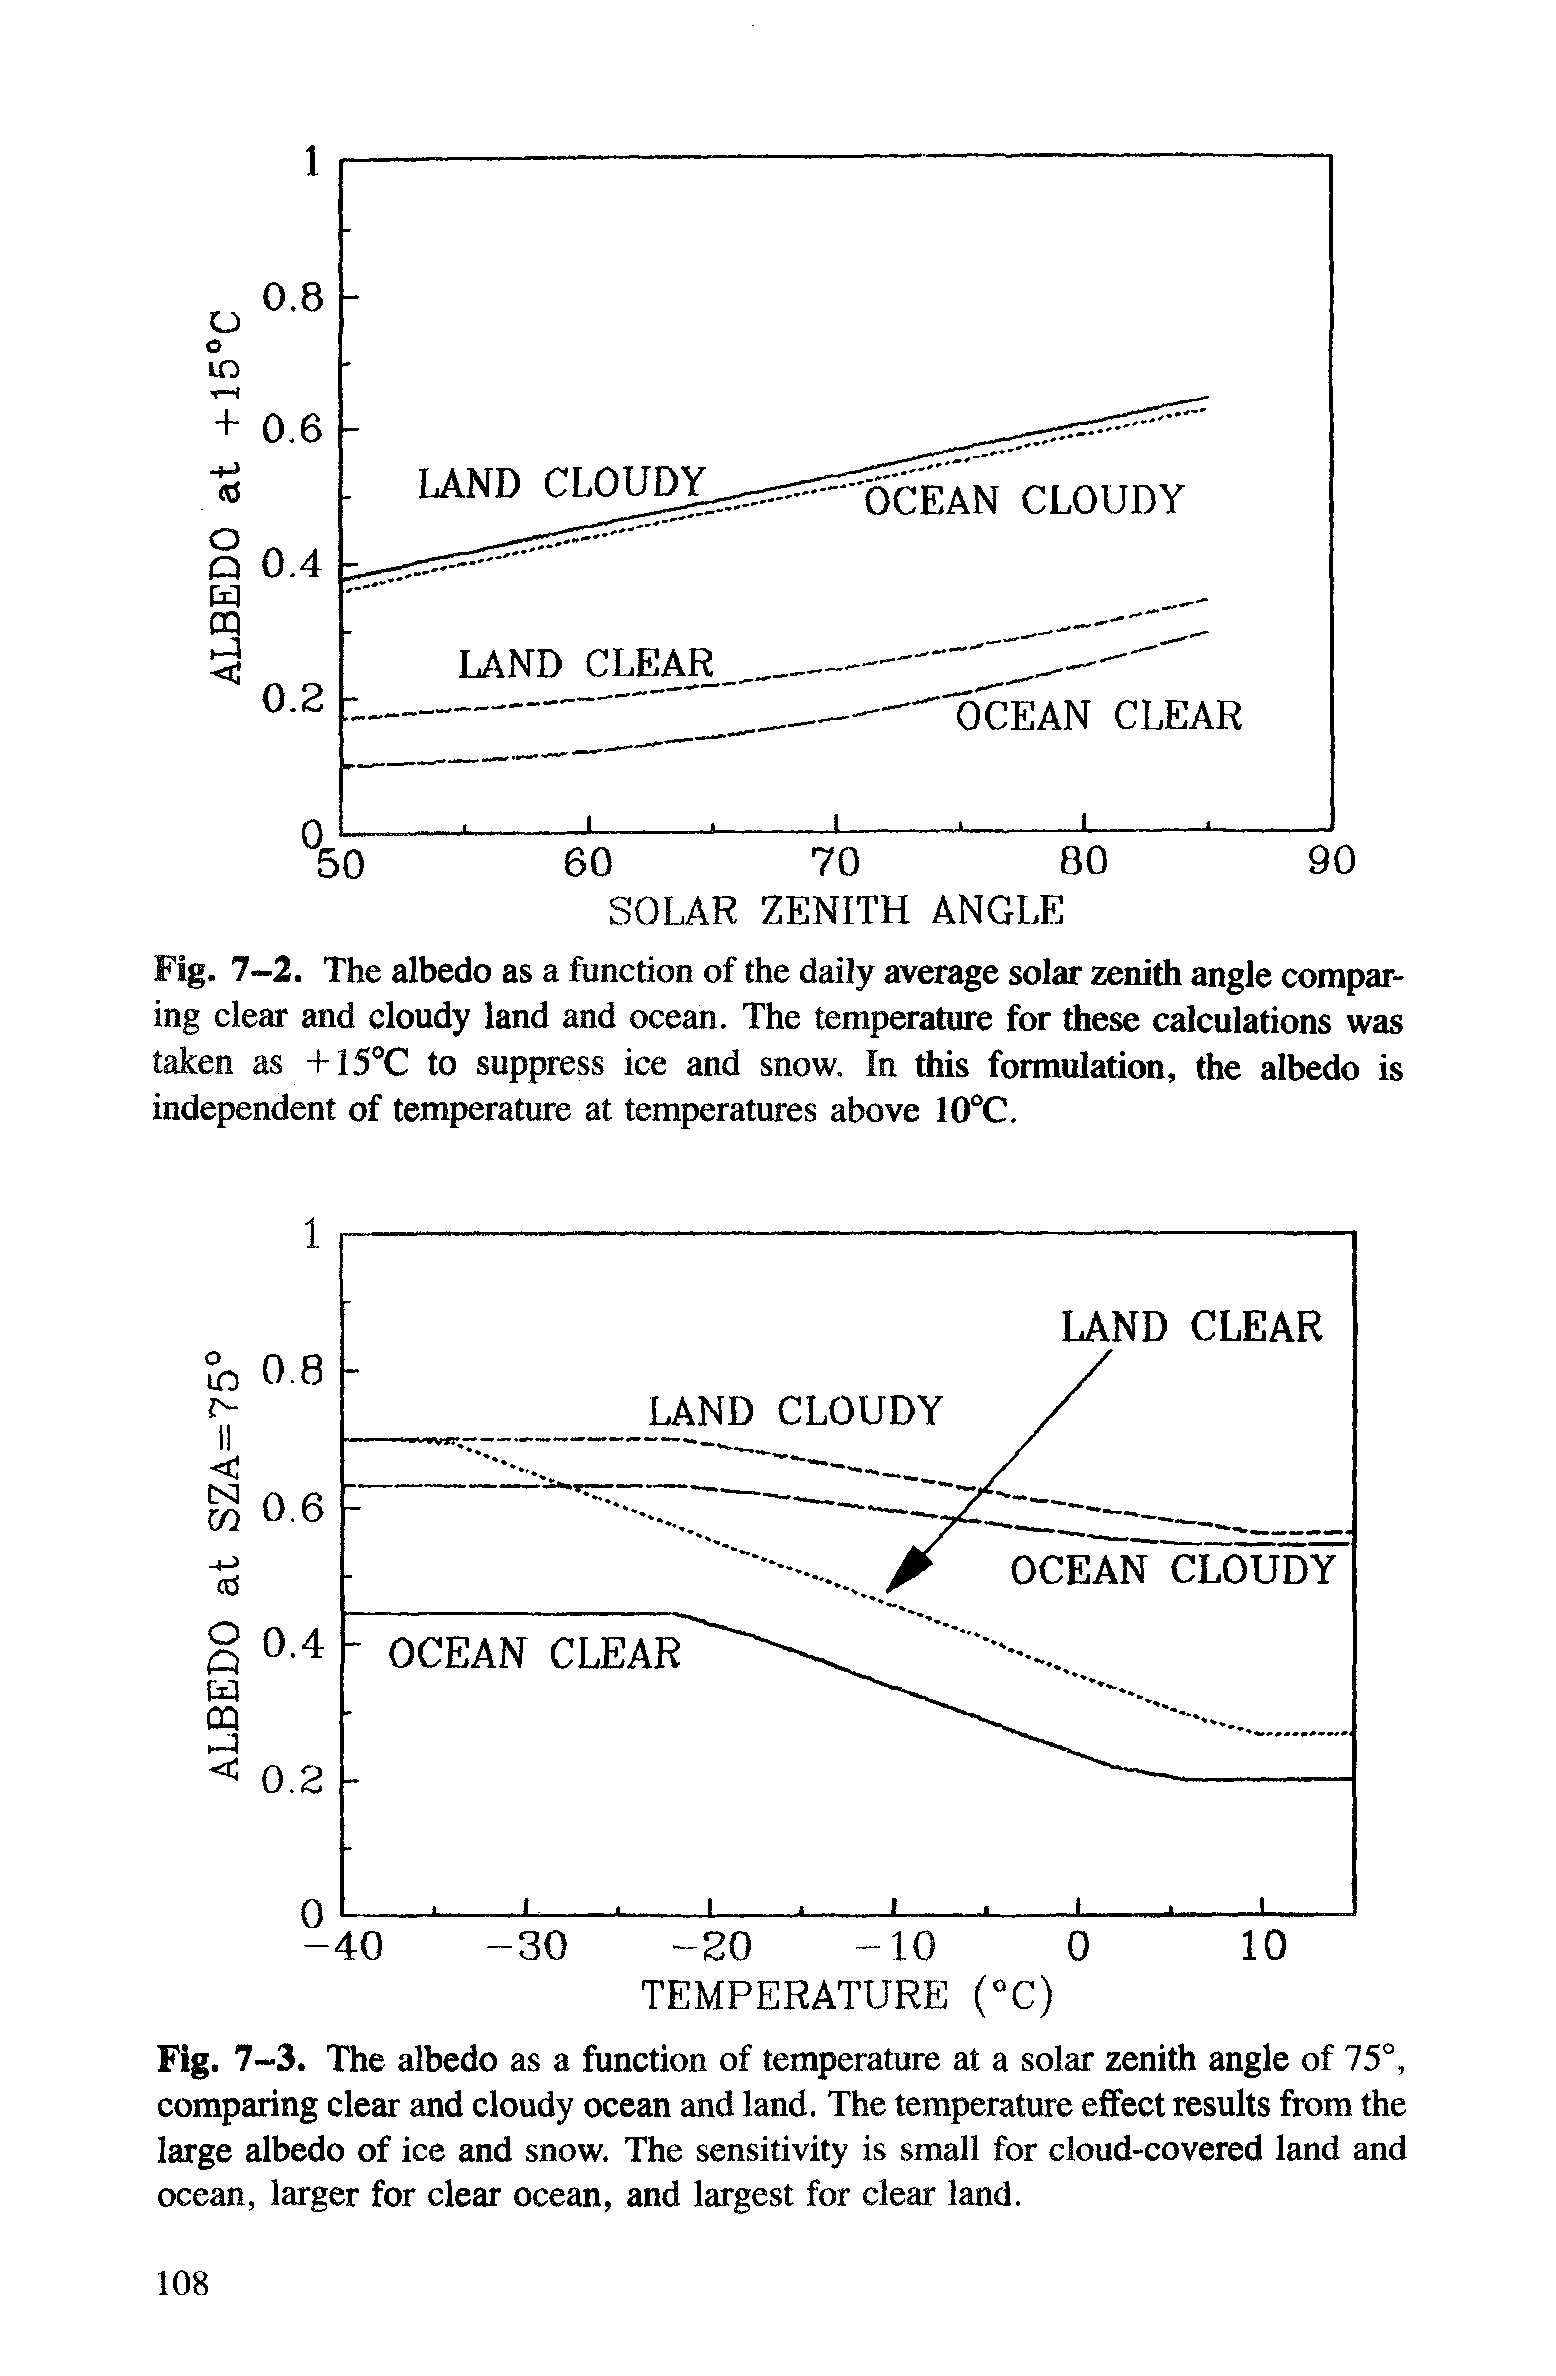 Fig. 7-3. The albedo as a function of temperature at a solar zenith angle of 75°, comparing clear and cloudy ocean and land. The temperature effect results from the large albedo of ice and snow. The sensitivity is small for cloud-covered land and...